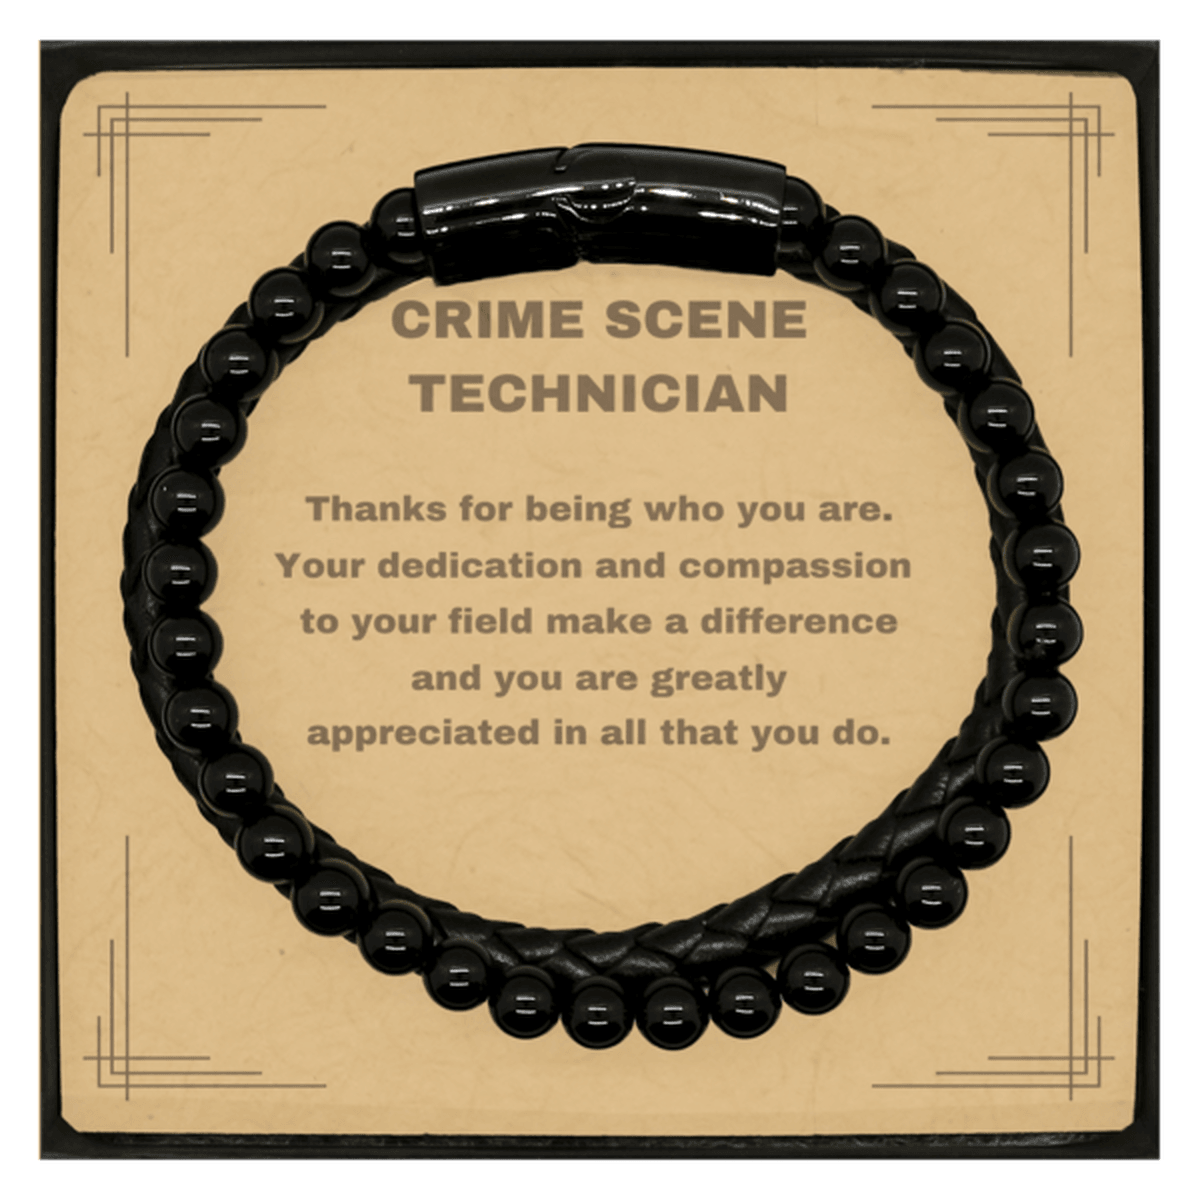 Crime Scene Technician Black Braided Leather Stone Bracelet - Thanks for being who you are - Birthday Christmas Jewelry Gifts Coworkers Colleague Boss - Mallard Moon Gift Shop